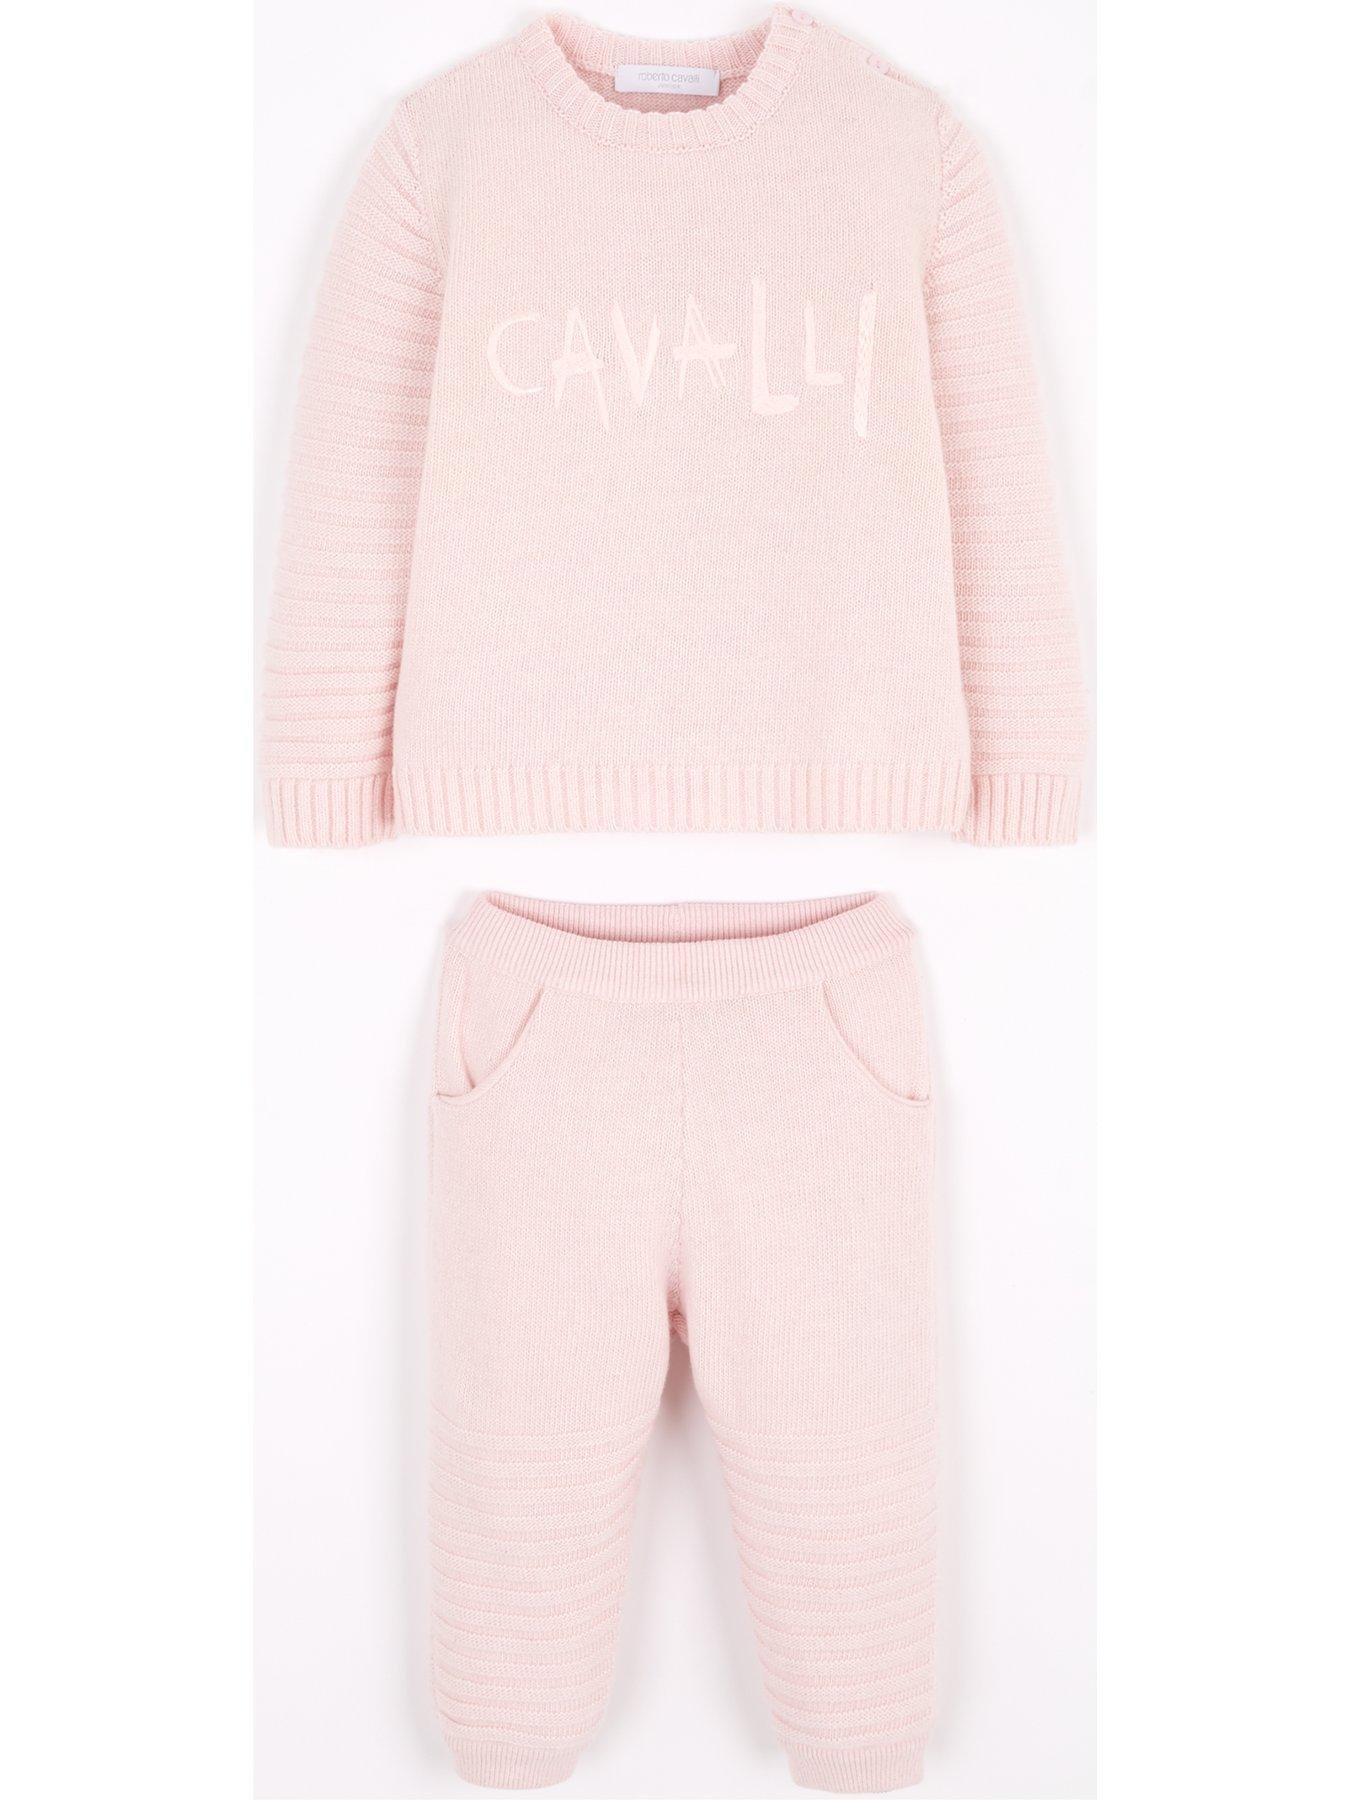 Kids Baby Knitted Outfit Set - Baby Pink